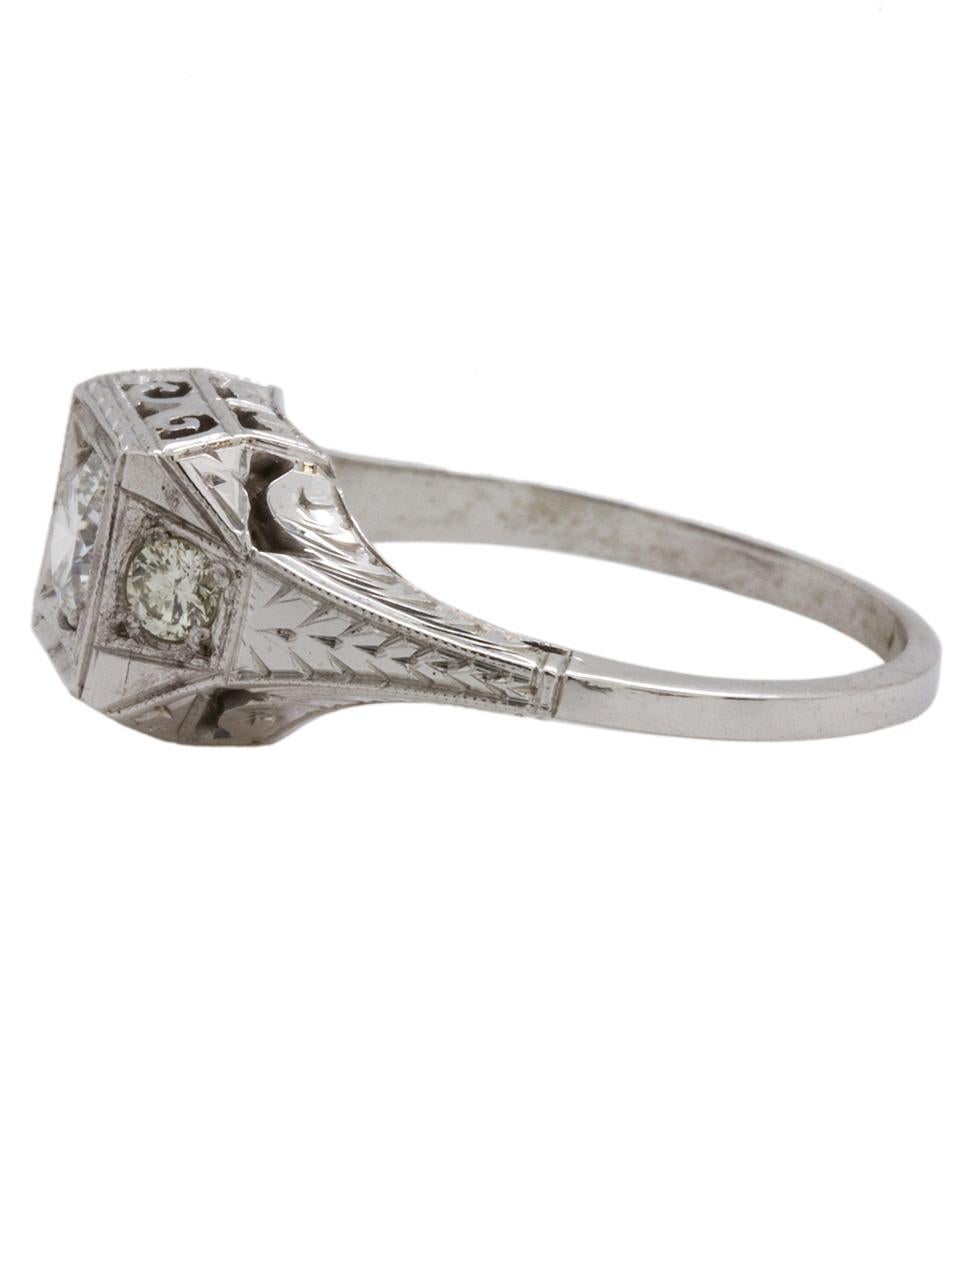 Beautiful 18k white gold  diamond engagement ring manufactured by “Belais” set with 0.37ct  round brilliant center diamond, H-VS2. Fantastic angular design setting with filigree and wheat pattern engraved detail, milgrain edging and scalloped side